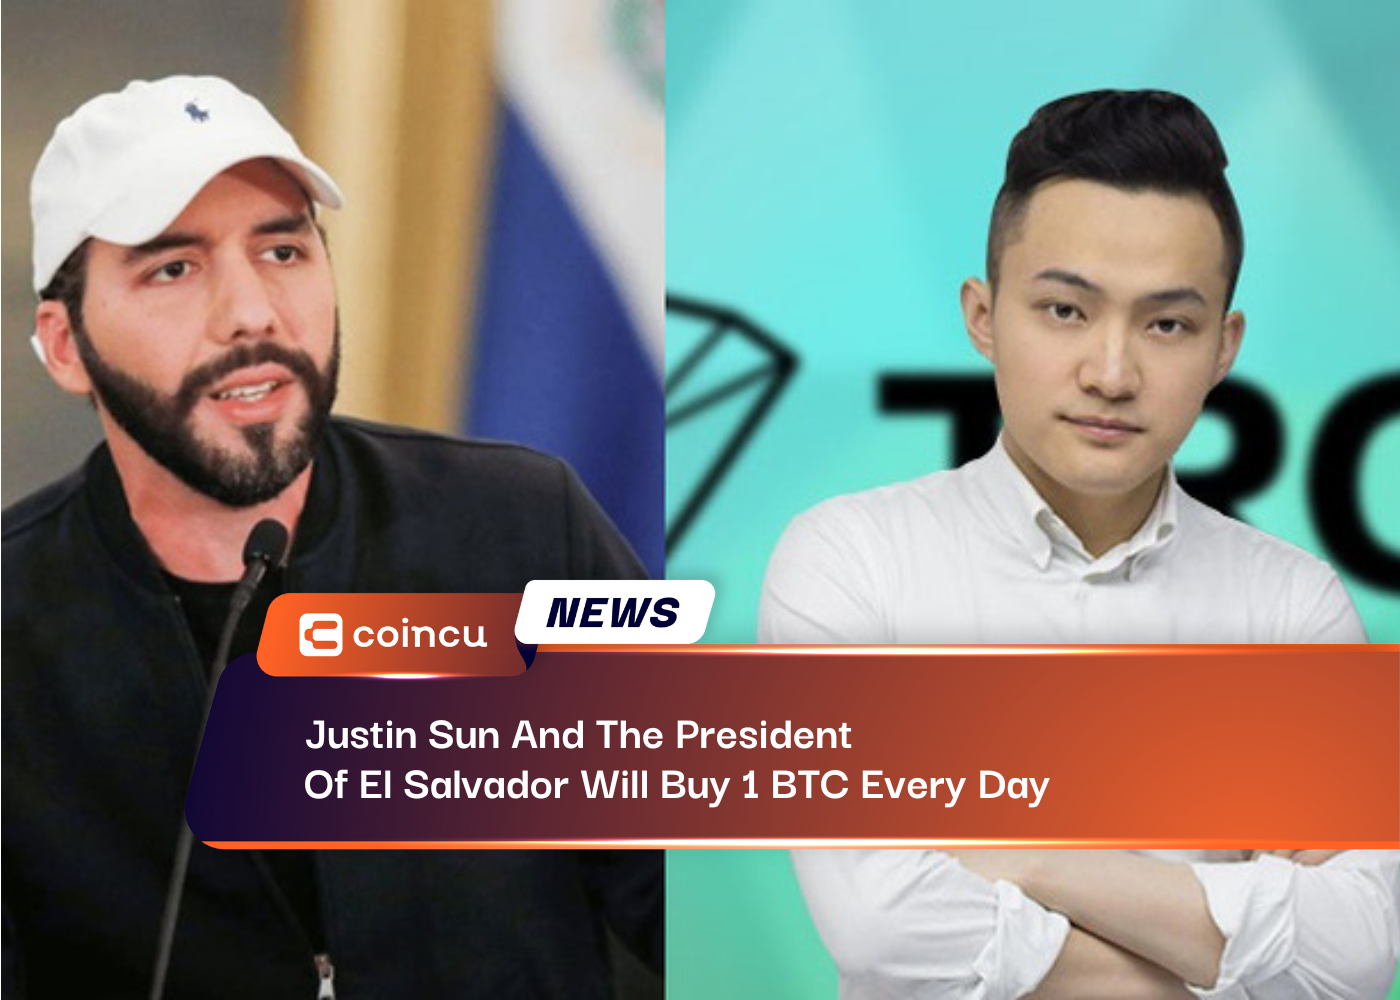 Justin Sun And The President Of El Salvador Will Buy 1 BTC Every Day